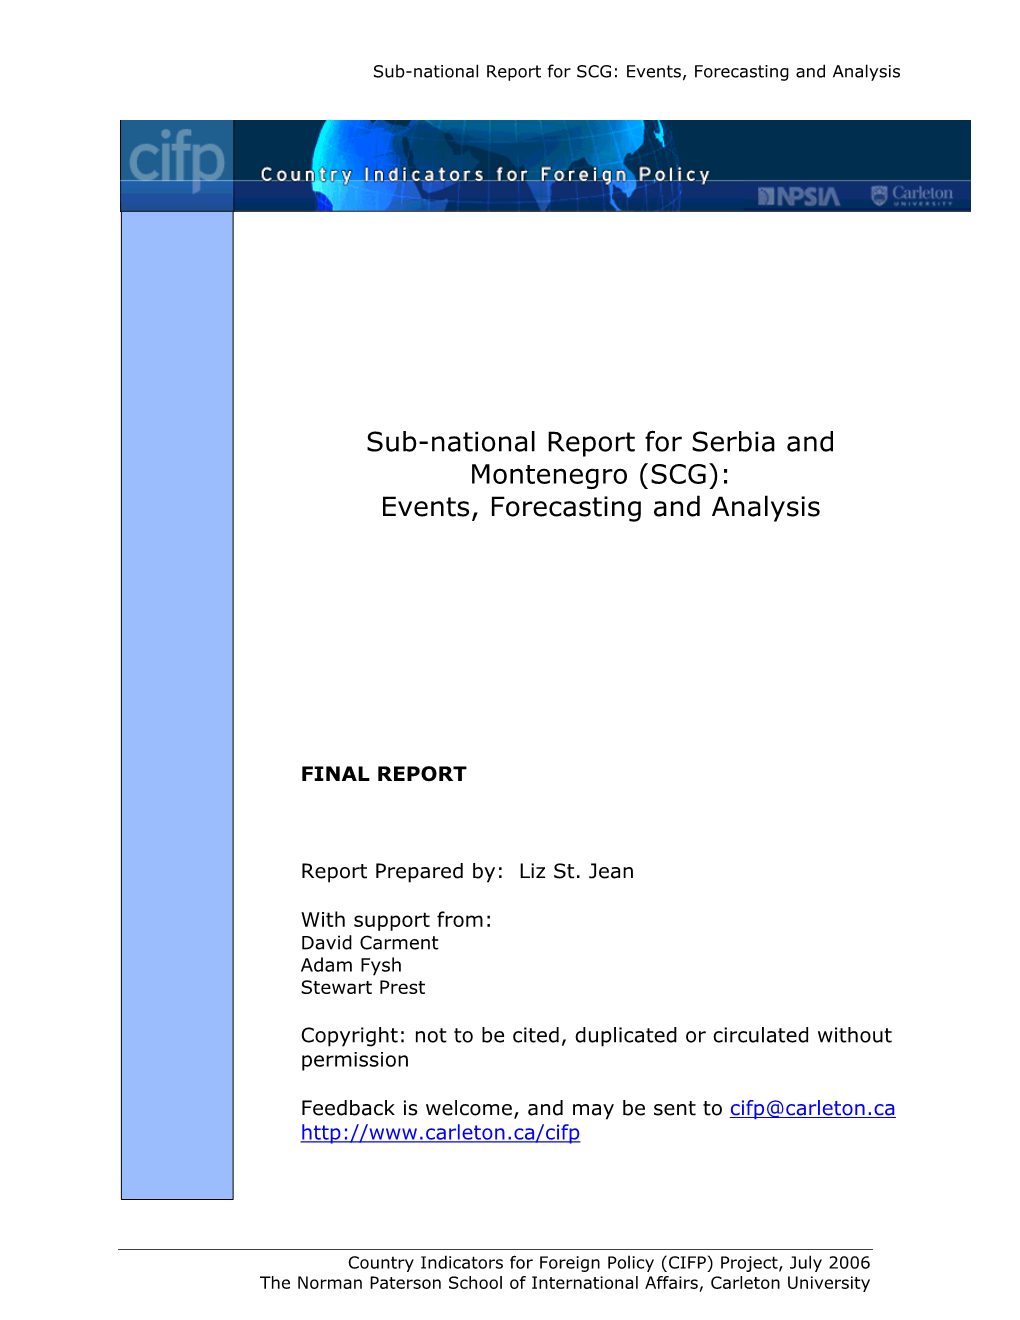 Sub-National Report for Serbia and Montenegro (SCG): Events, Forecasting and Analysis